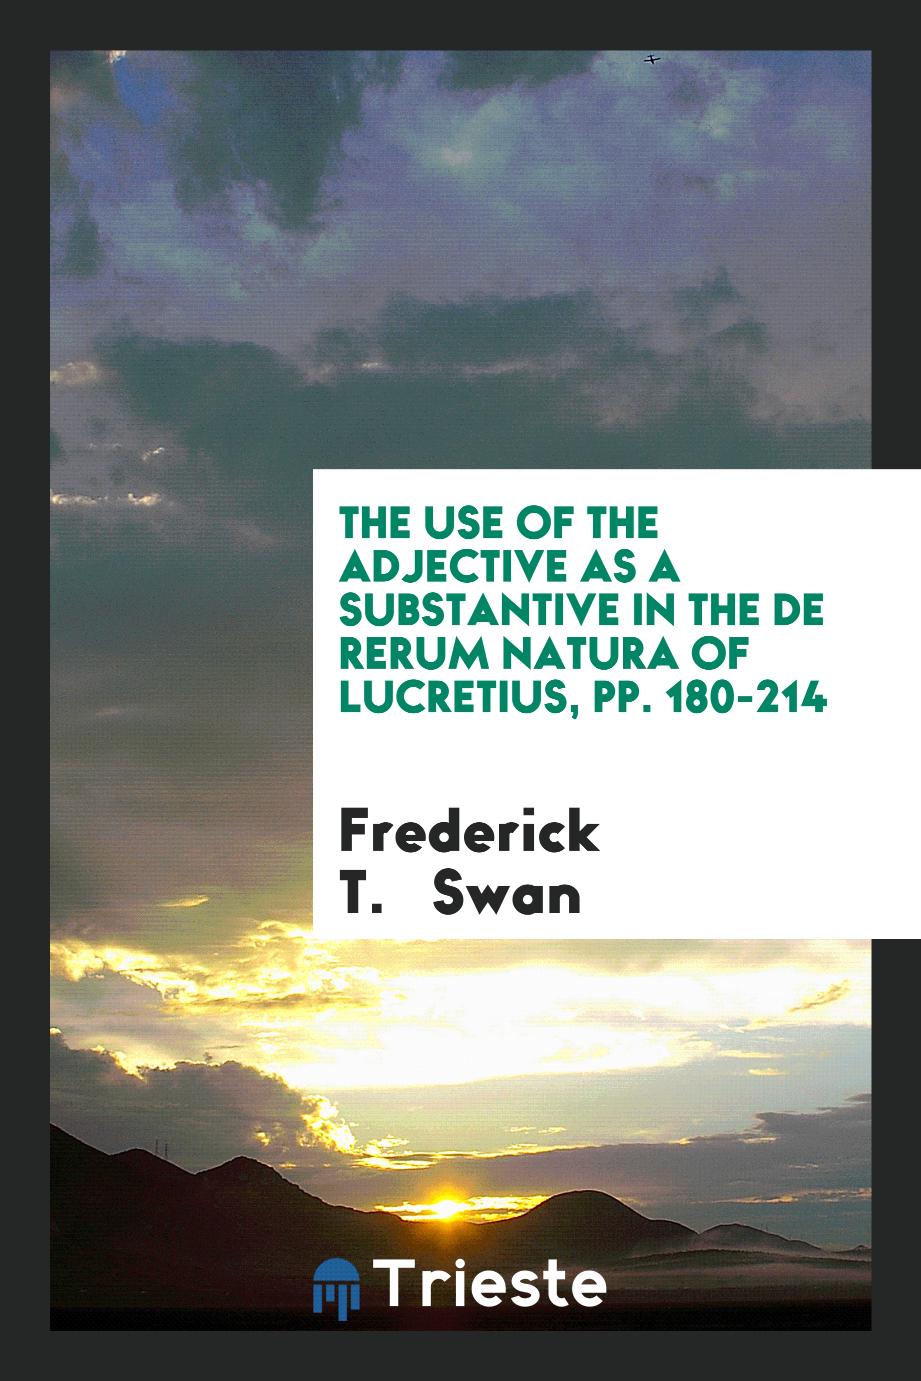 The Use of the Adjective as a Substantive in the De Rerum Natura of Lucretius, pp. 180-214